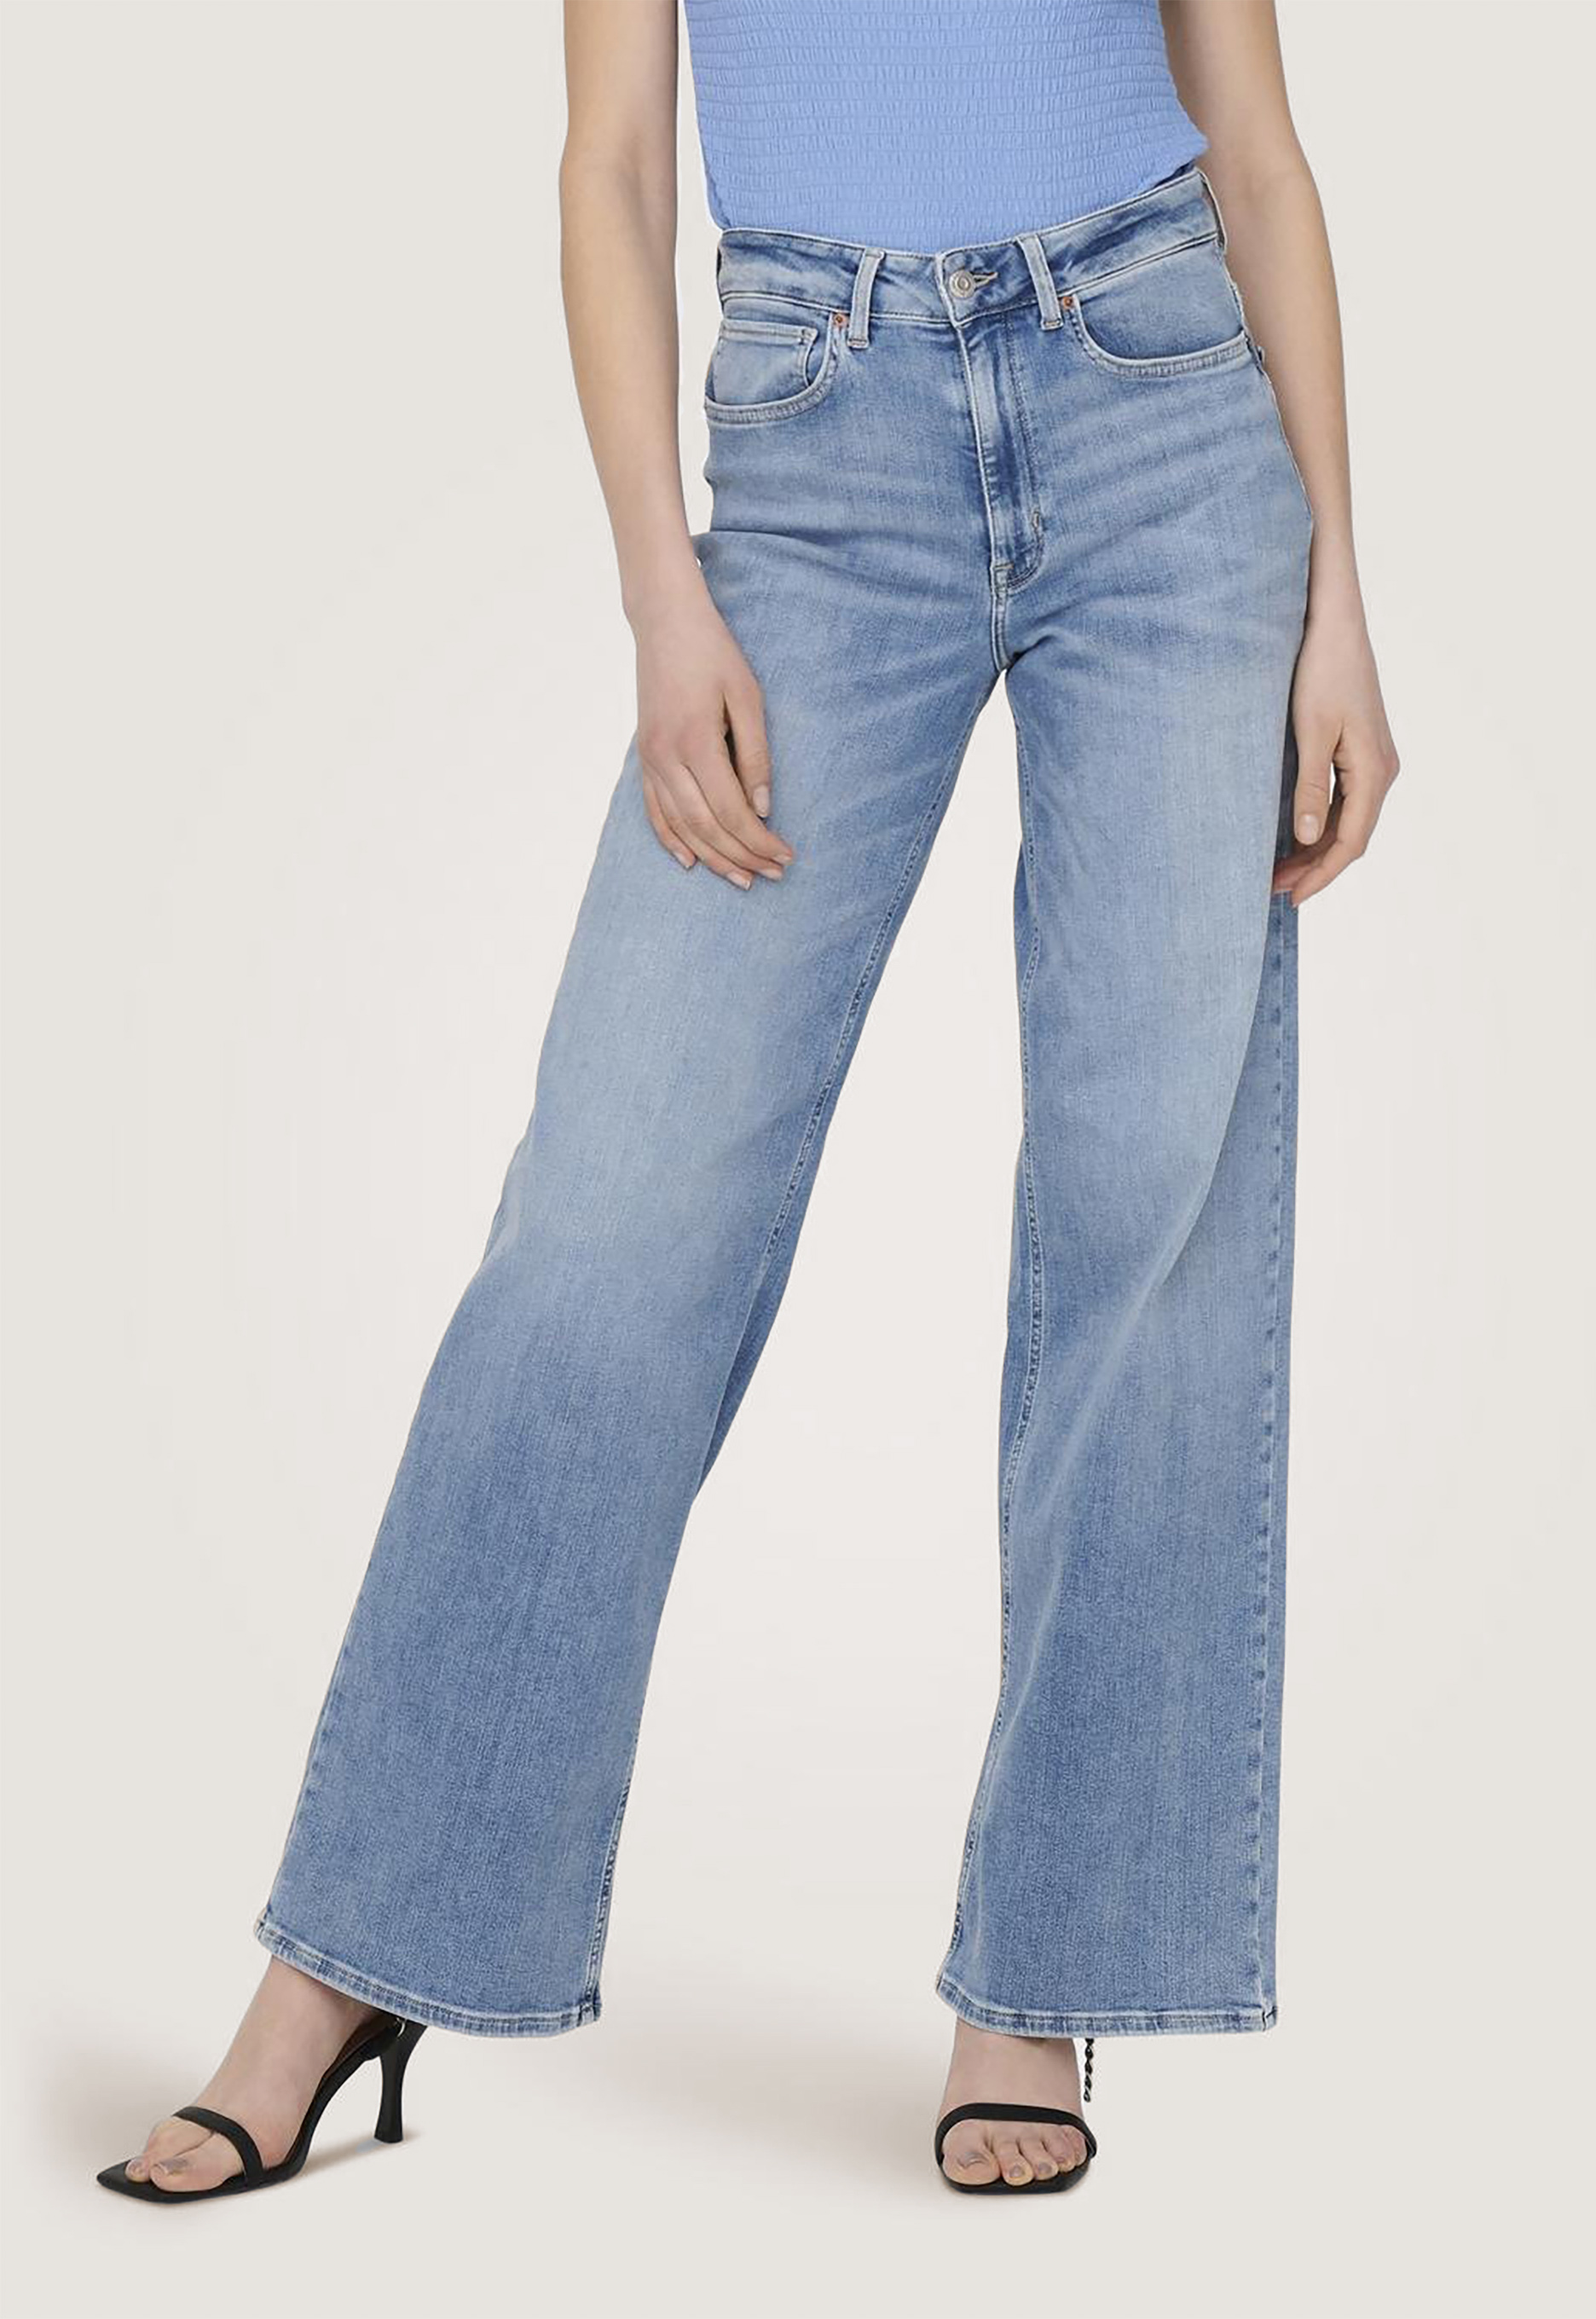 Only Madison Wide Leg Jeans